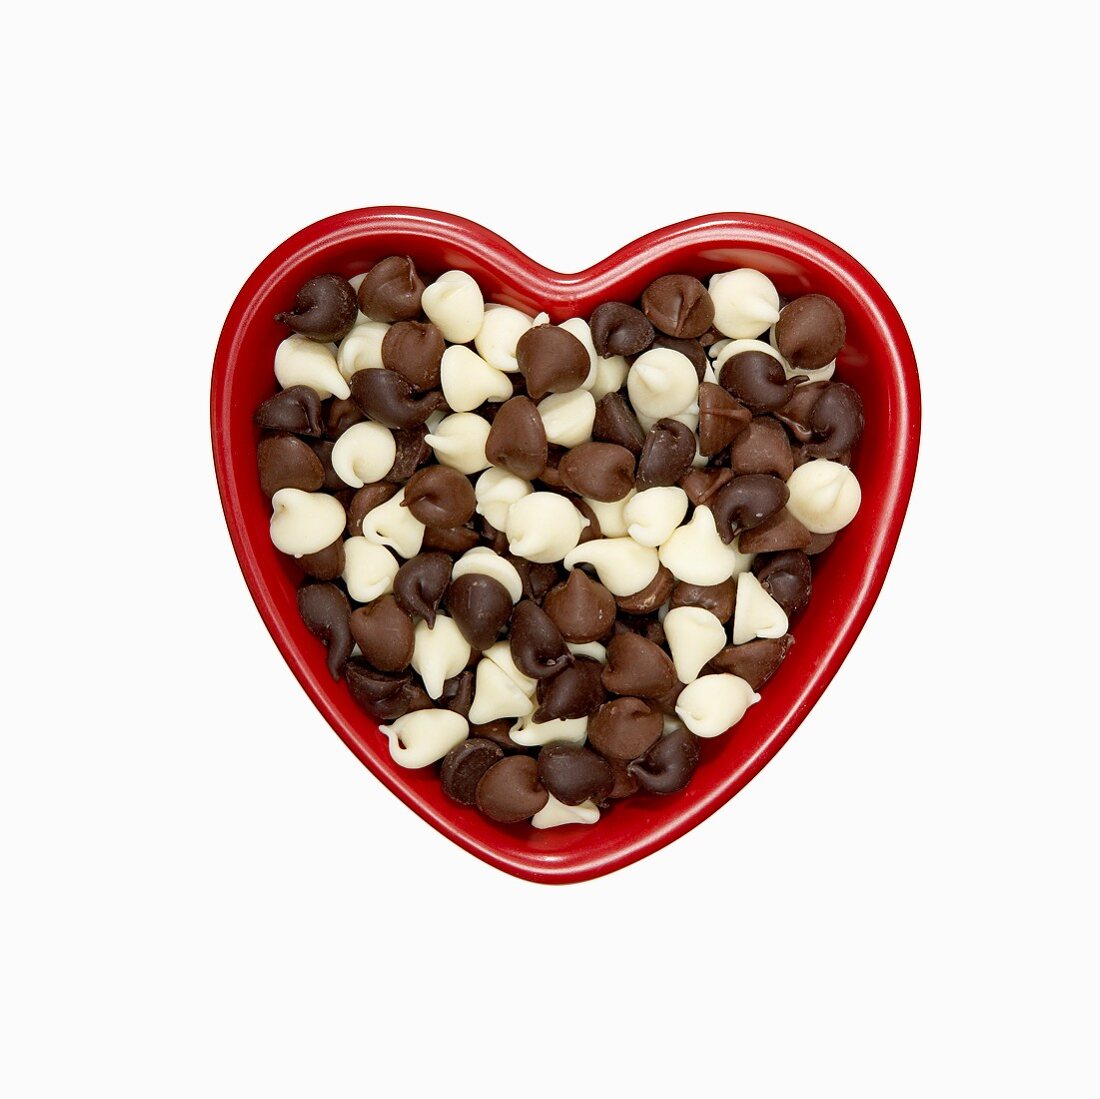 Milk, White and Dark Chocolate Chips in a Heart Shaped Bowl